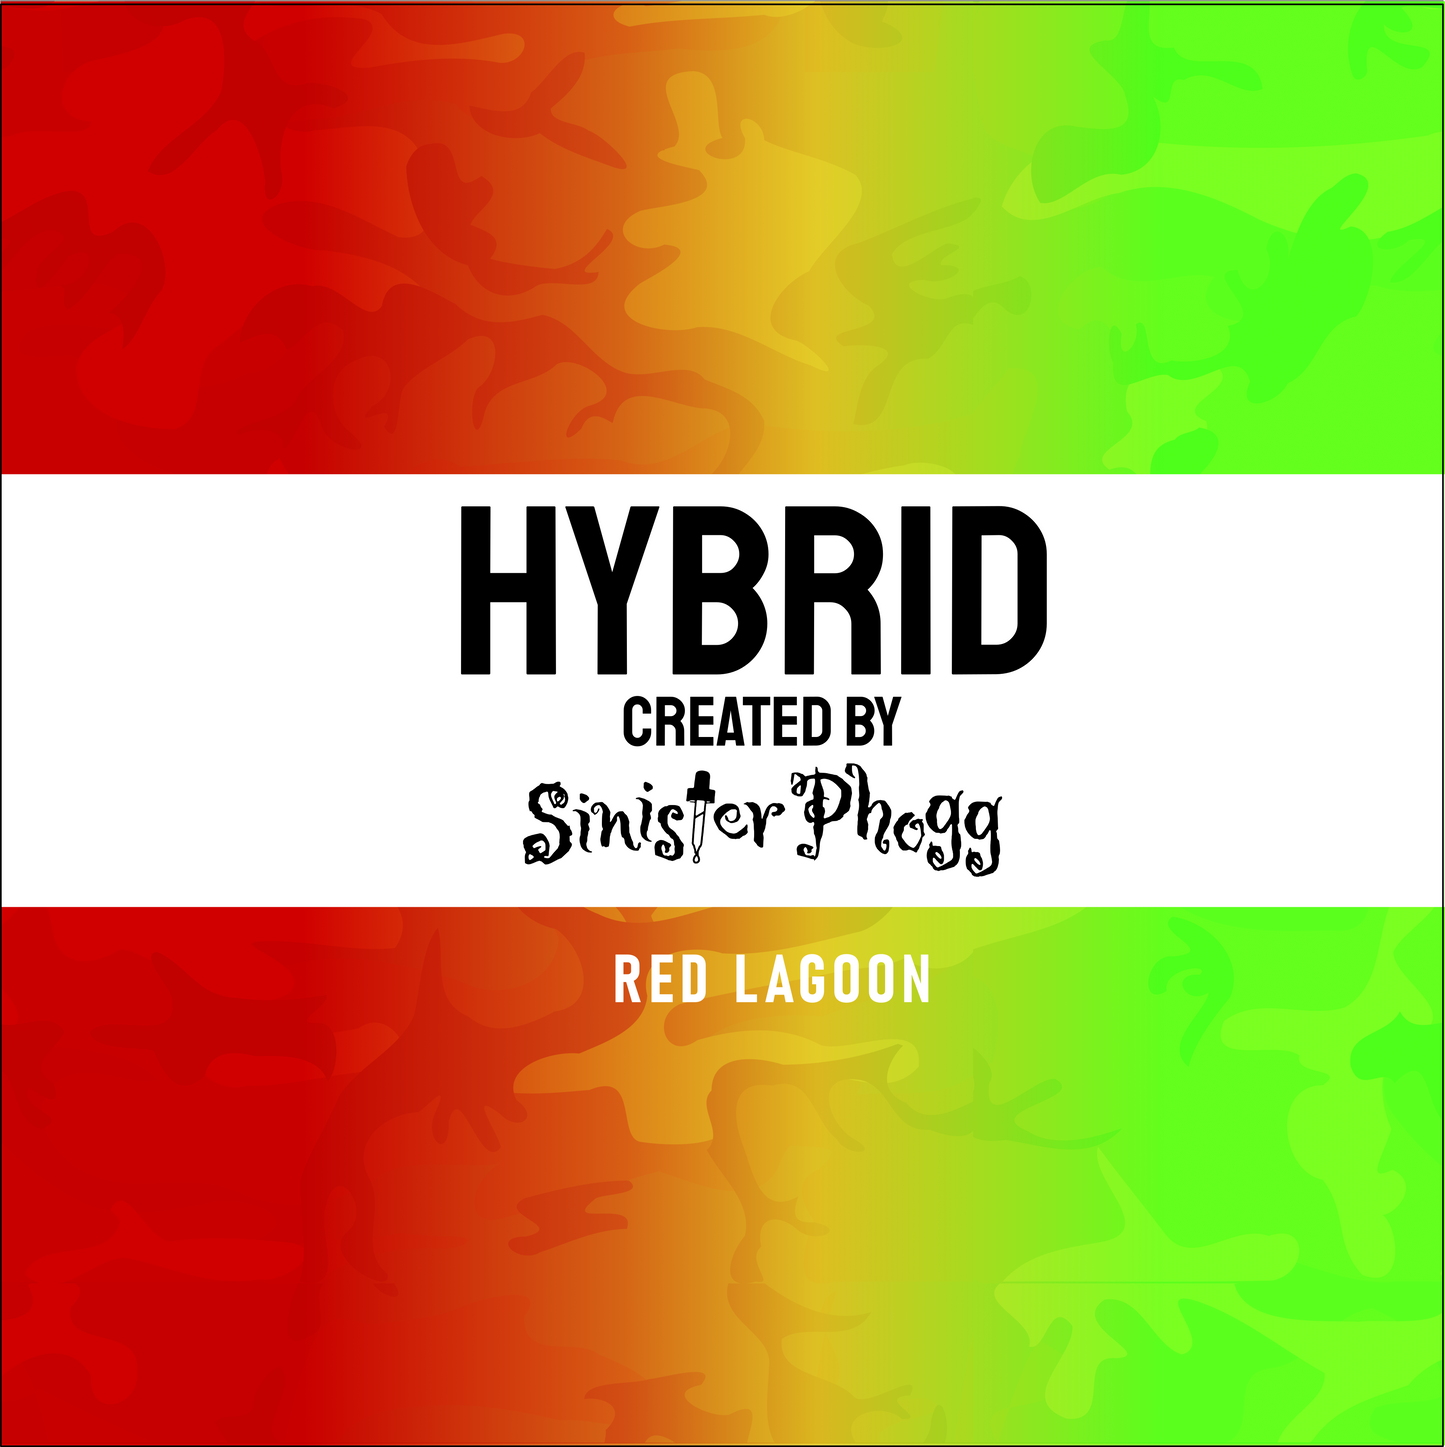 Red Lagoon - HYBRID by Sinister Phogg